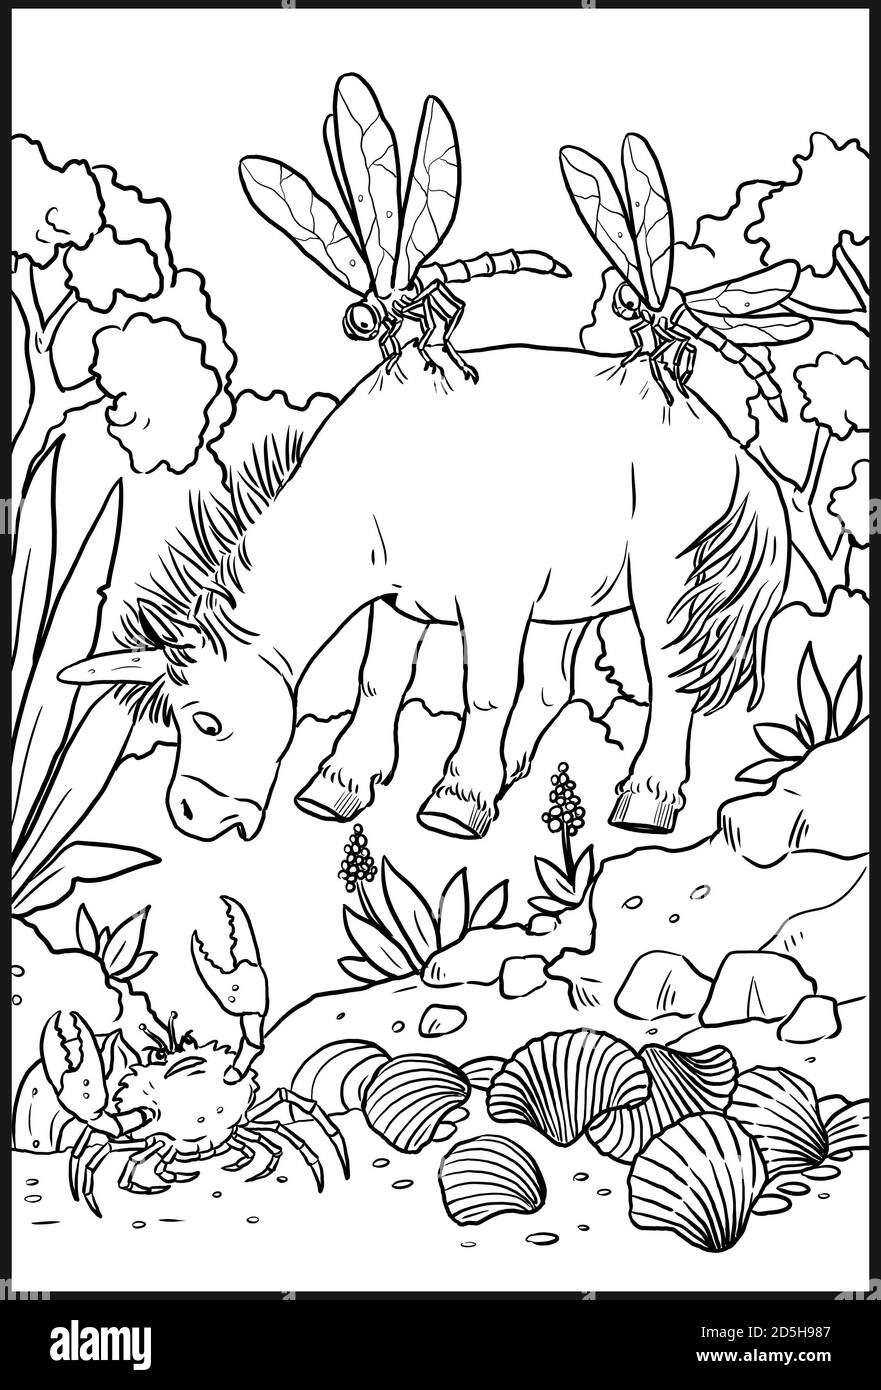 Funny unicorn for coloring. Coloring page for horse lovers. Stock Photo